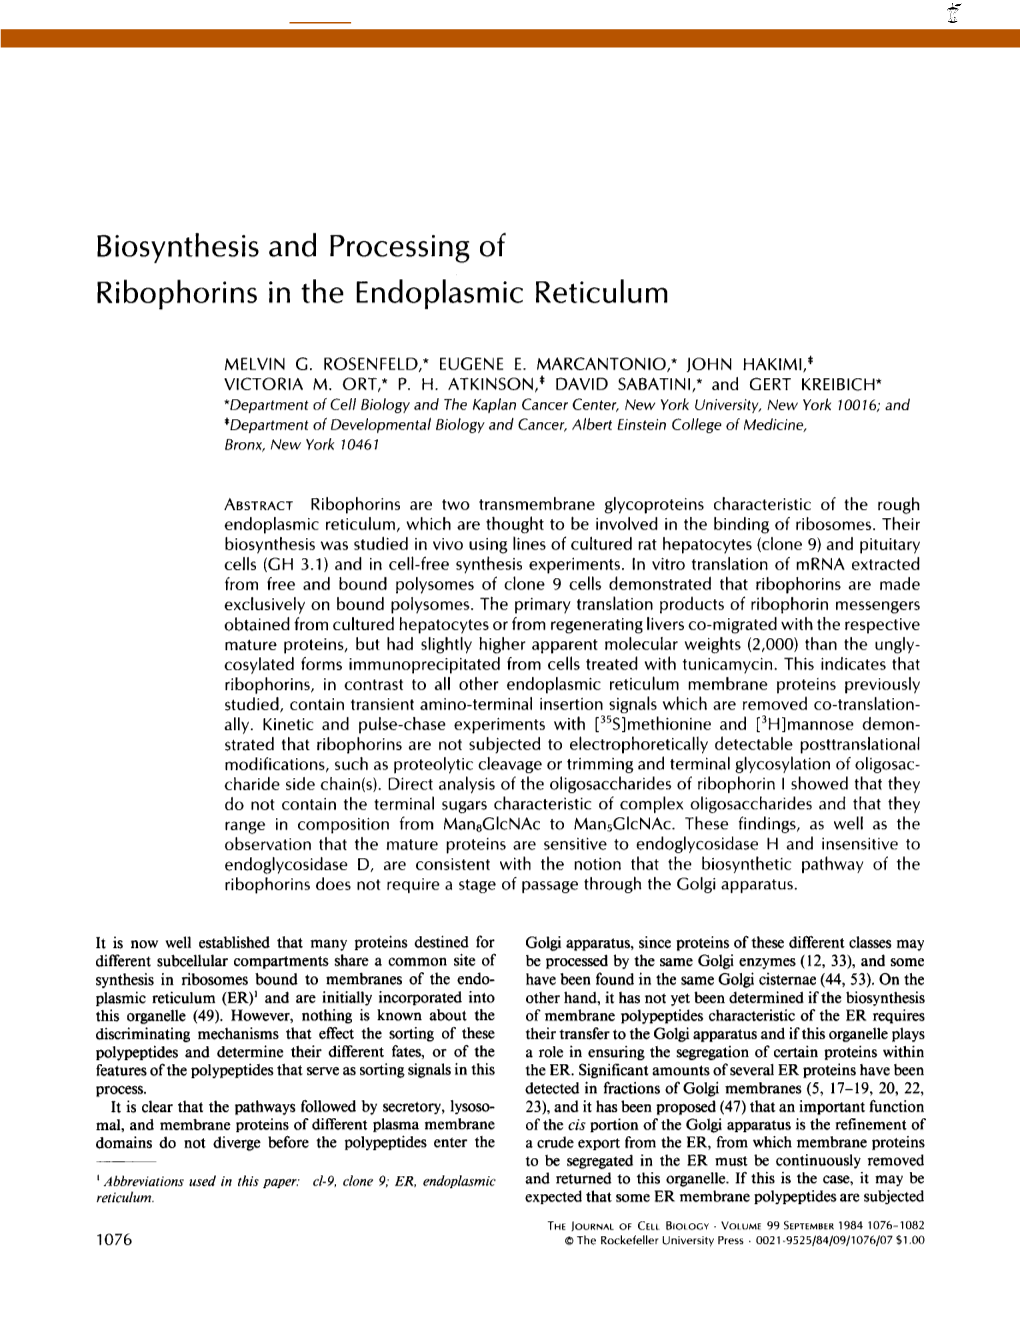 Biosynthesis Ribophorins and Processing of in the Endoplasmic